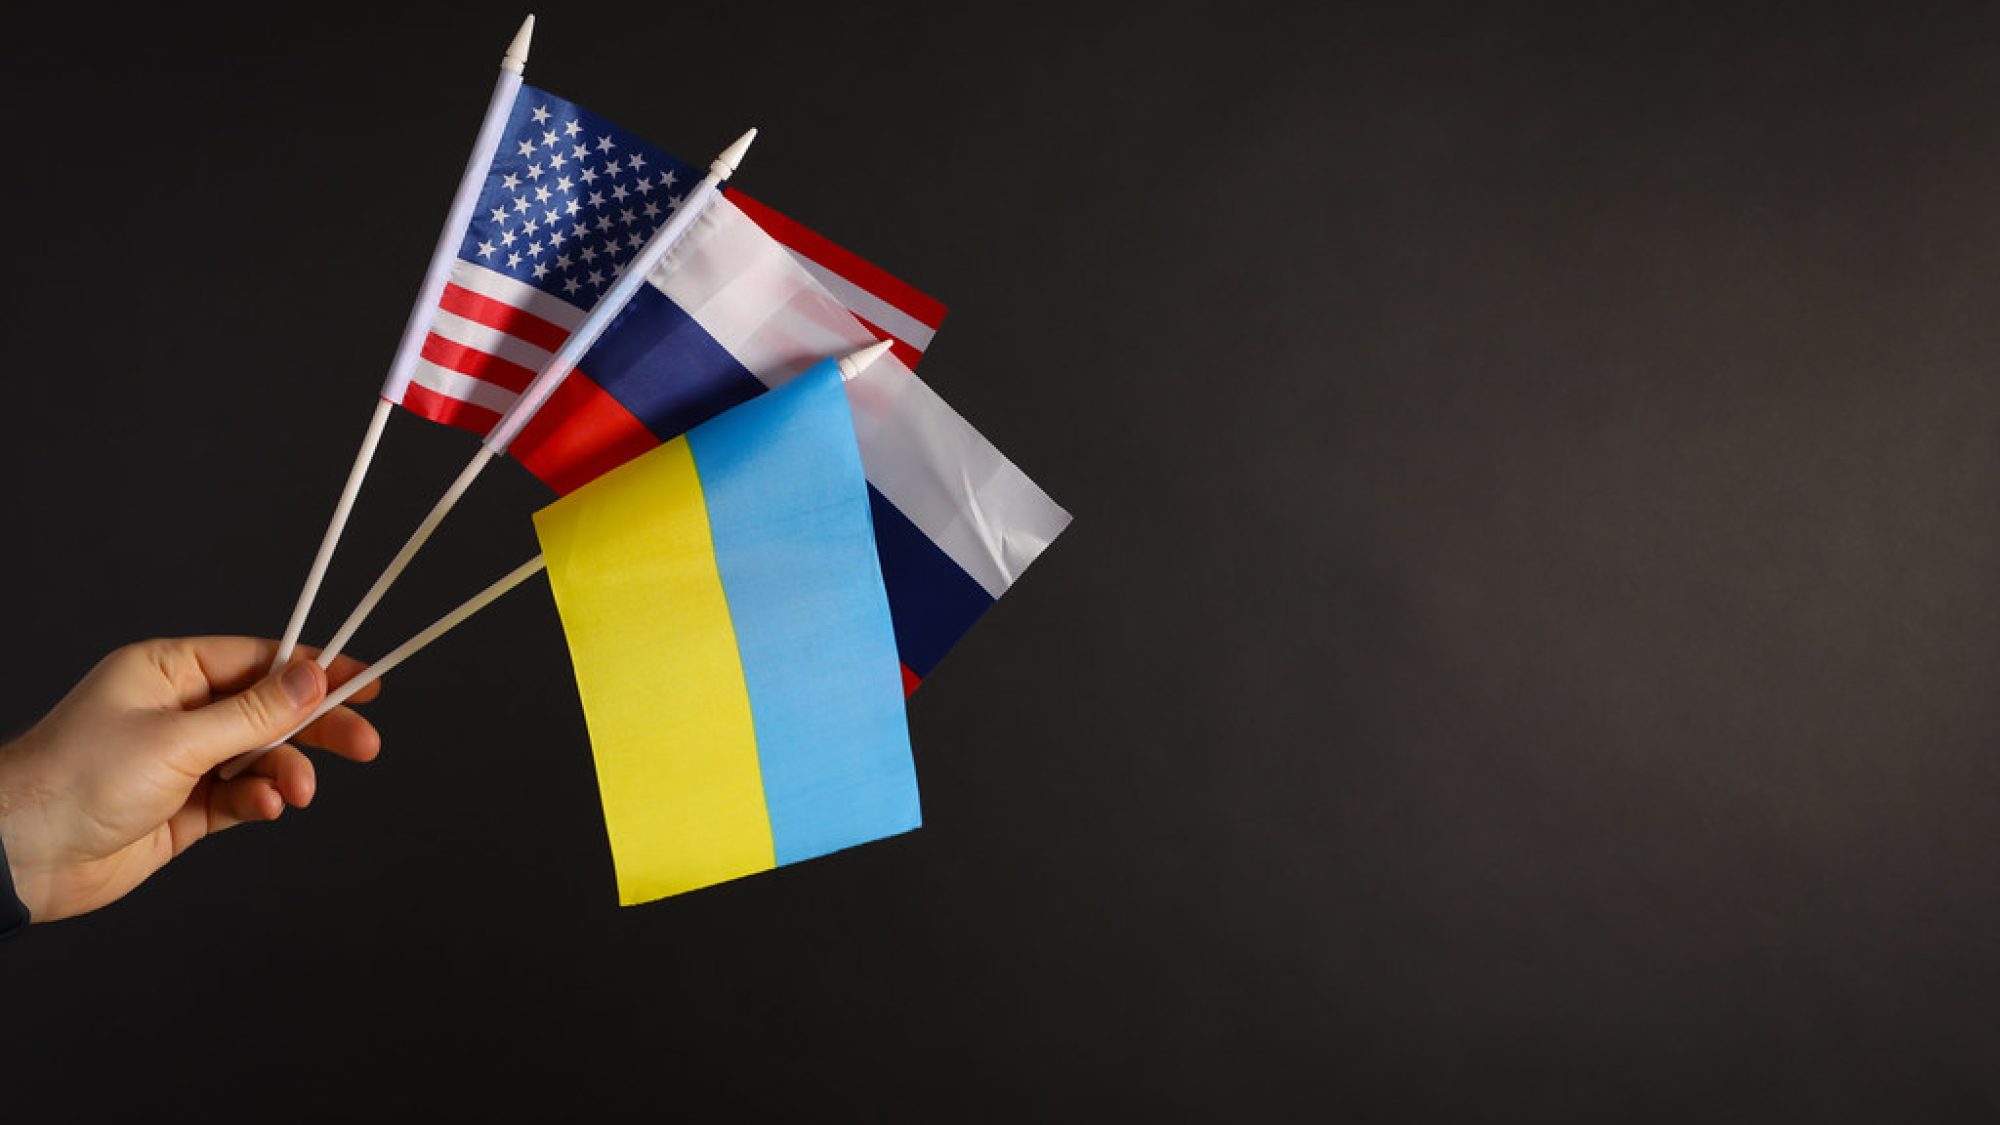 American, Russian, and Ukrainian flags